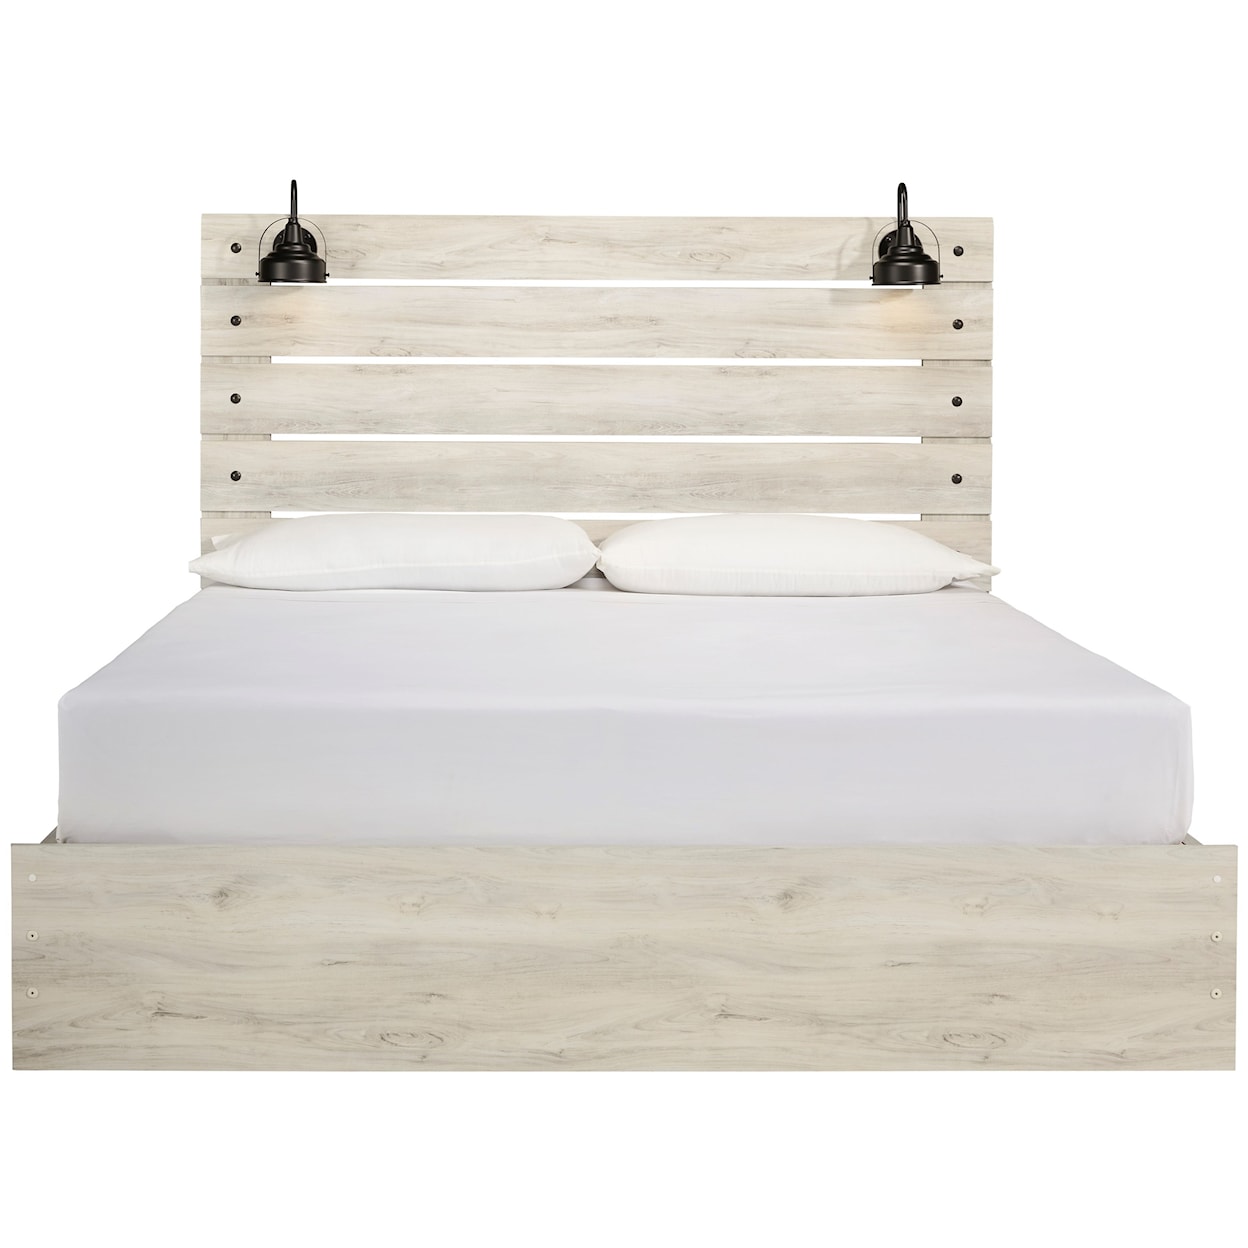 Ashley Signature Design Cambeck King Storage Bed with 2 Drawers